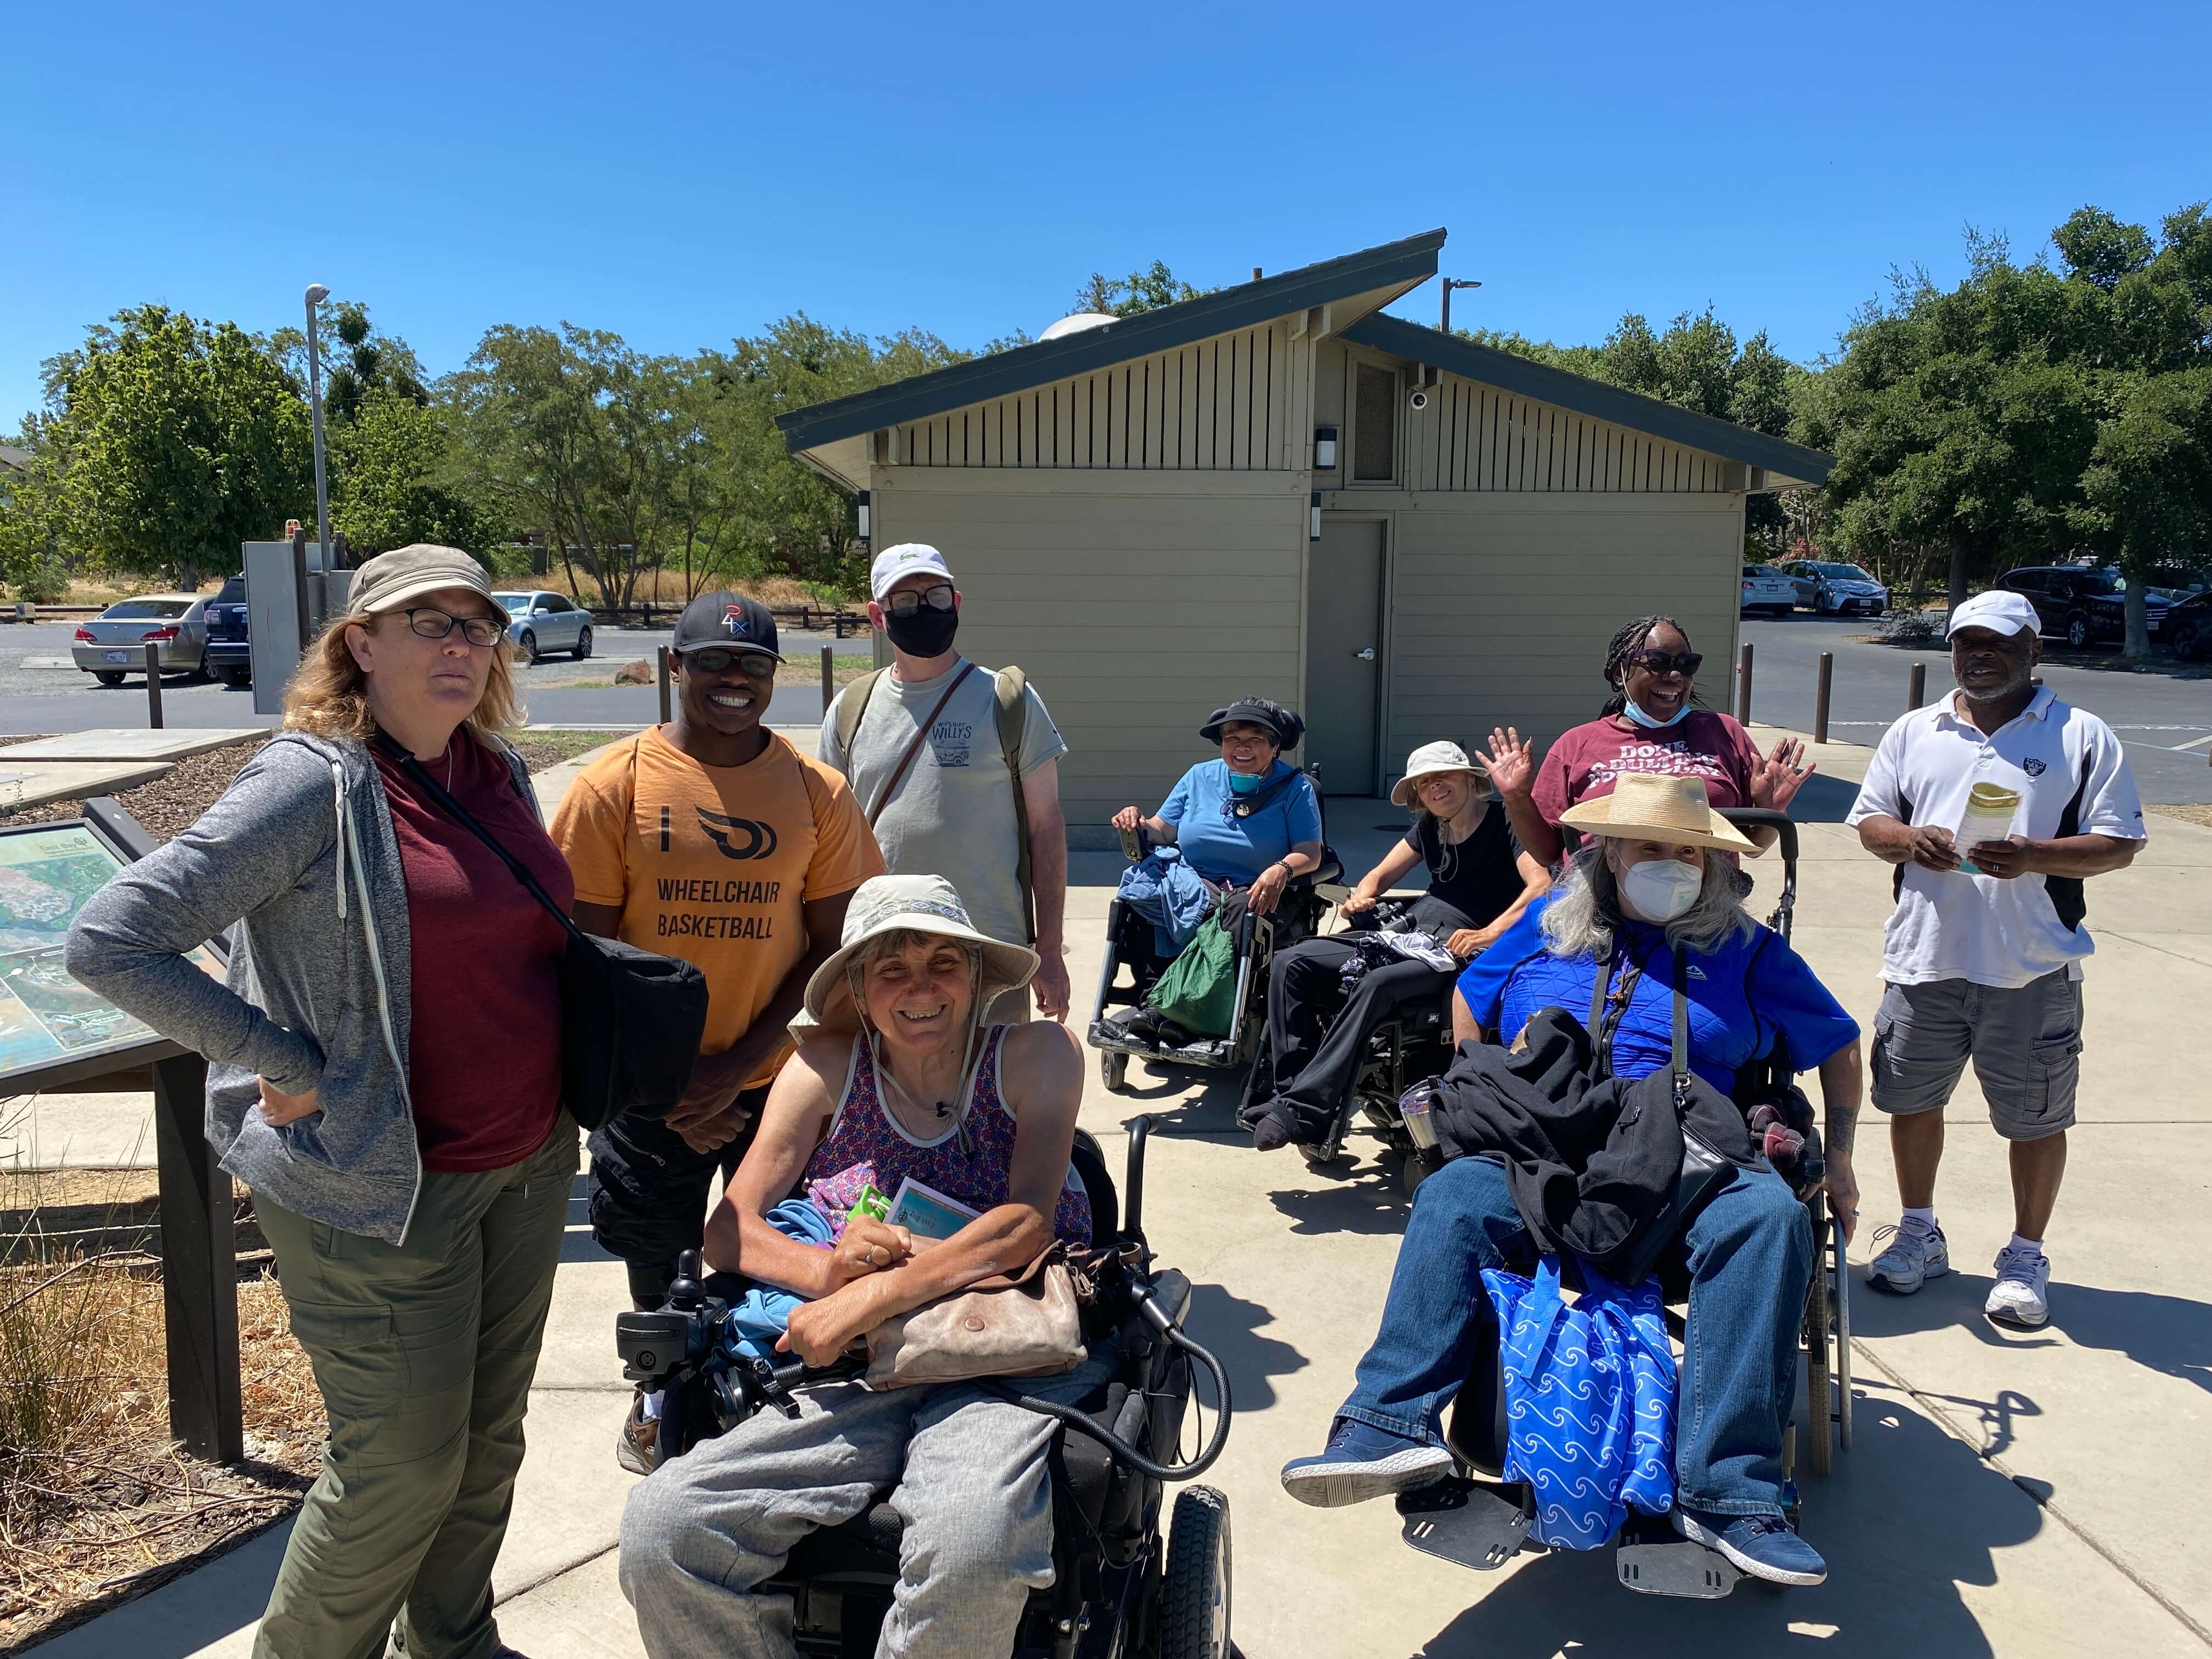 A racially diverse group of people with various physical disabilities including some in wheelchairs, arrive at Big Break Regional Shoreline for All Abilities Day 